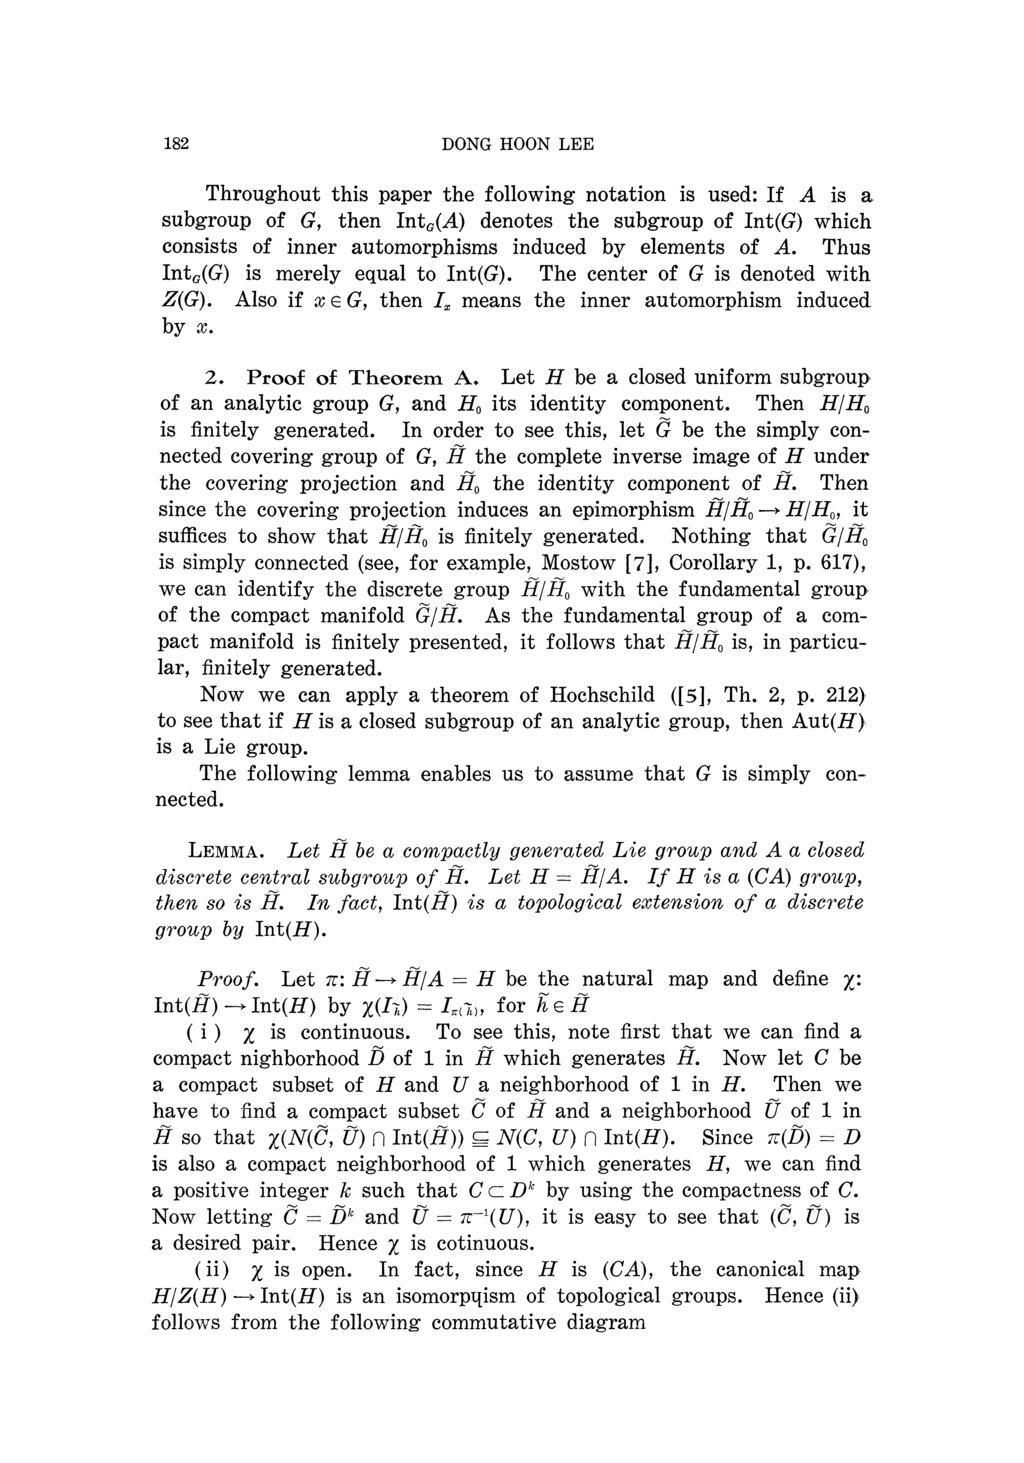 182 DONG HOON LEE Throughout this paper the following notation is used: If A is a subgroup of G, then Int G (A) denotes the subgroup of Int(G) which consists of inner automorphisms induced by